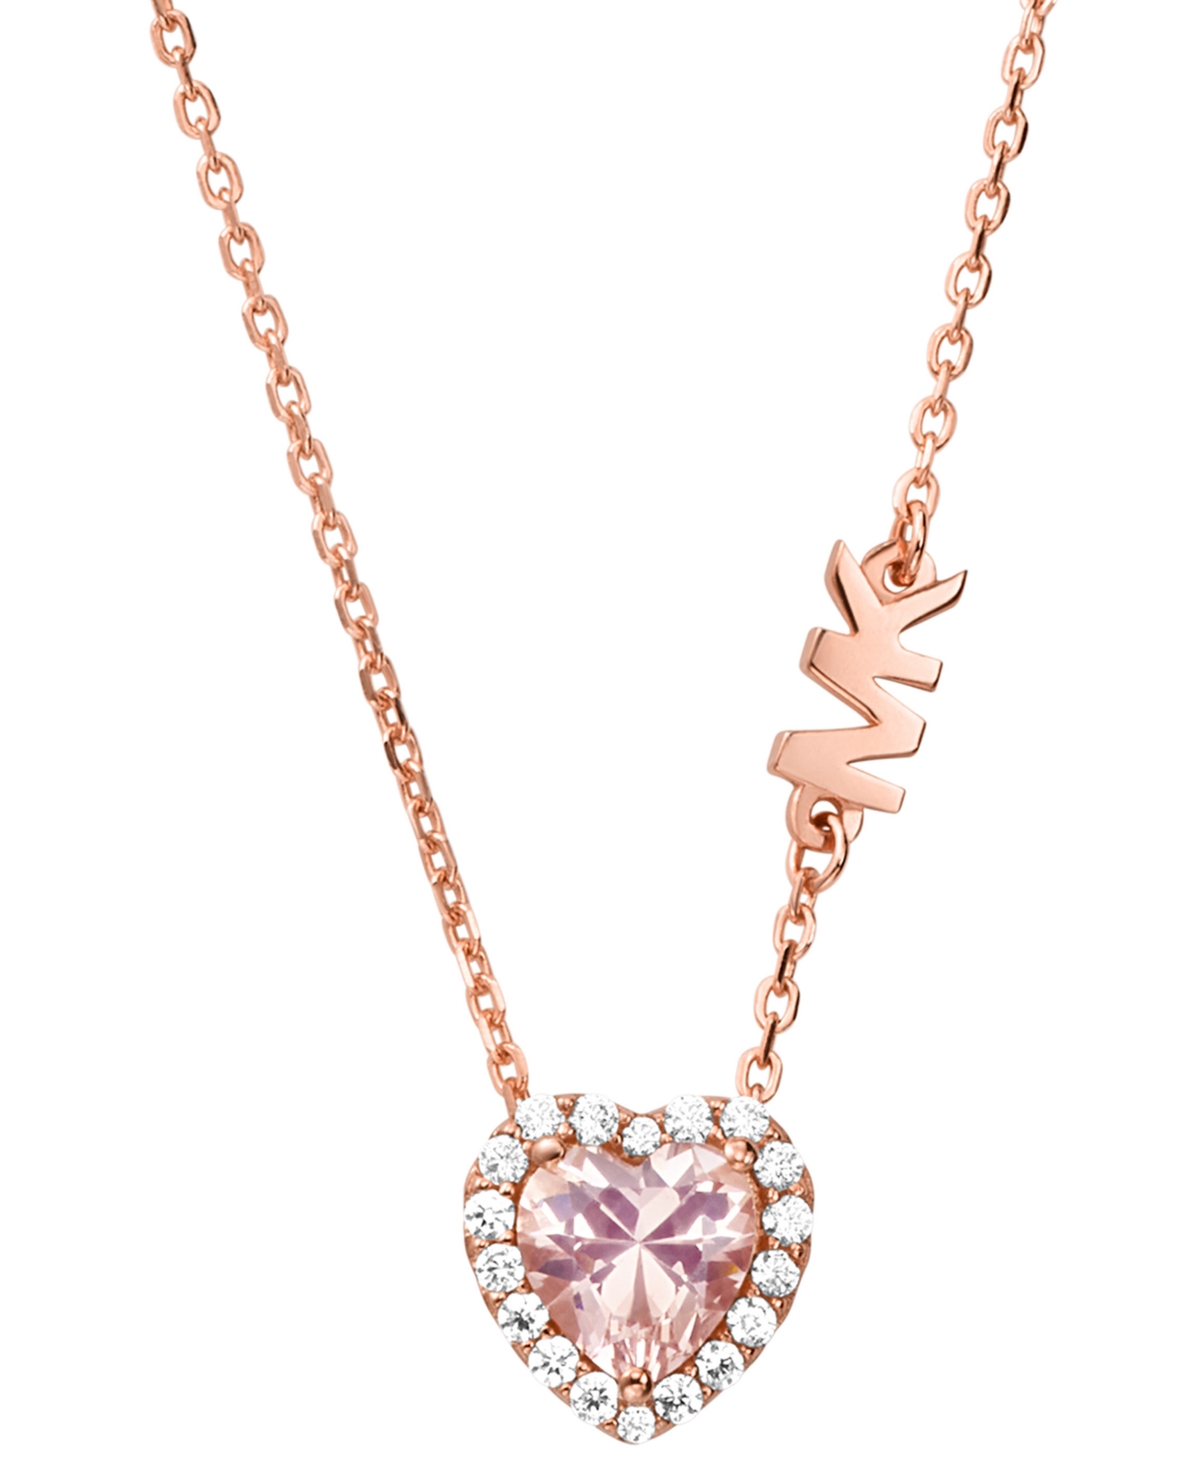 Michael Kors 14k Rose Gold-plated Sterling Silver Crystal Heart Halo Pendant Necklace, 16" + 2" Extender